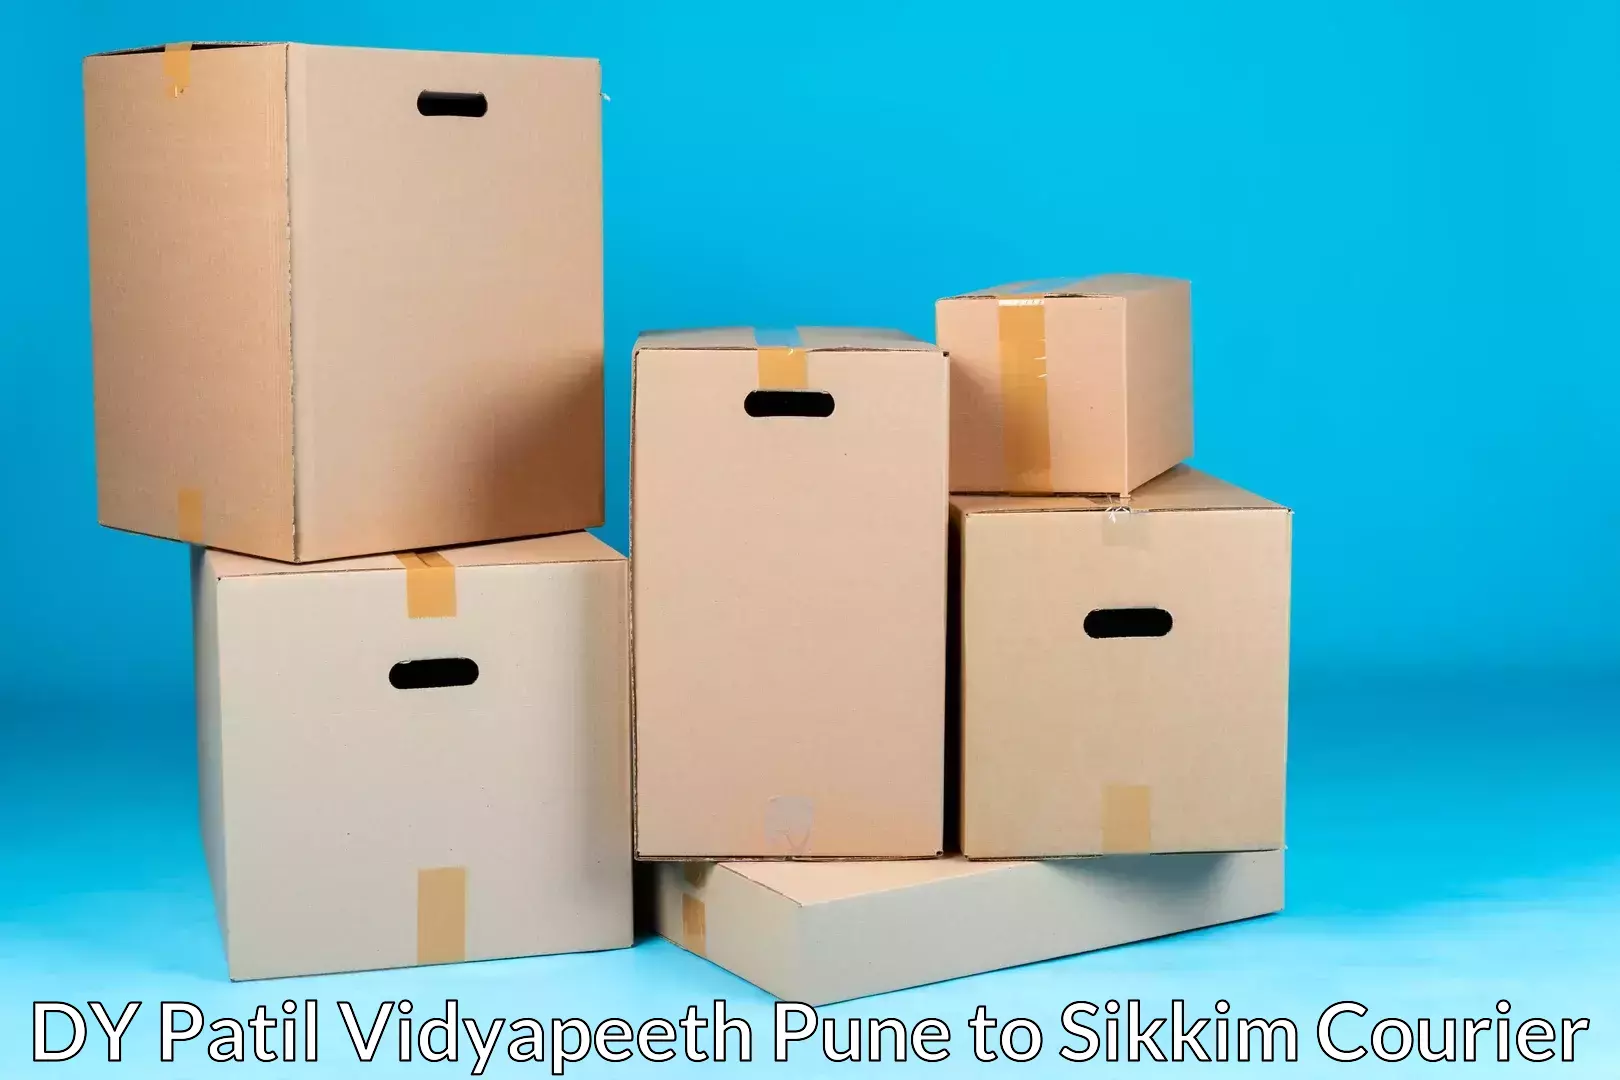 Furniture transport solutions DY Patil Vidyapeeth Pune to Sikkim